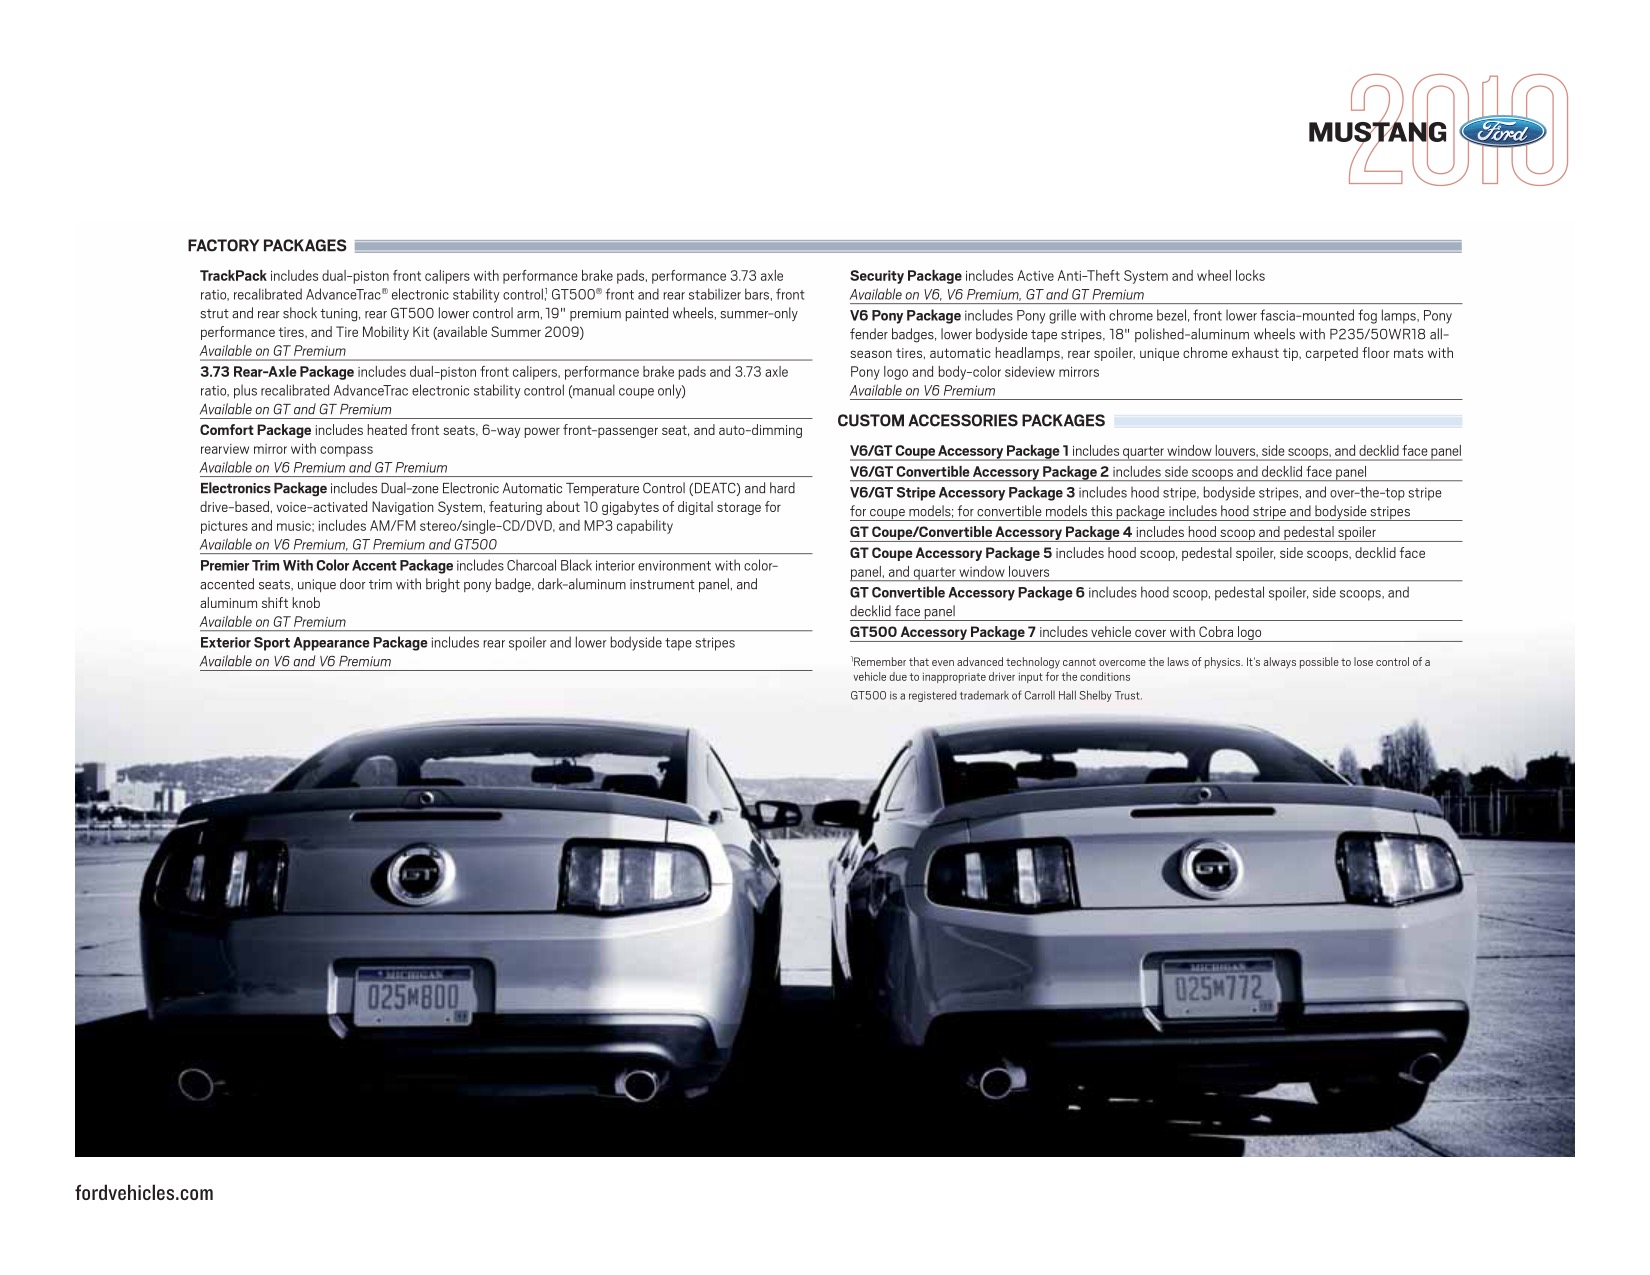 2010 Ford Mustang Brochure Page 6